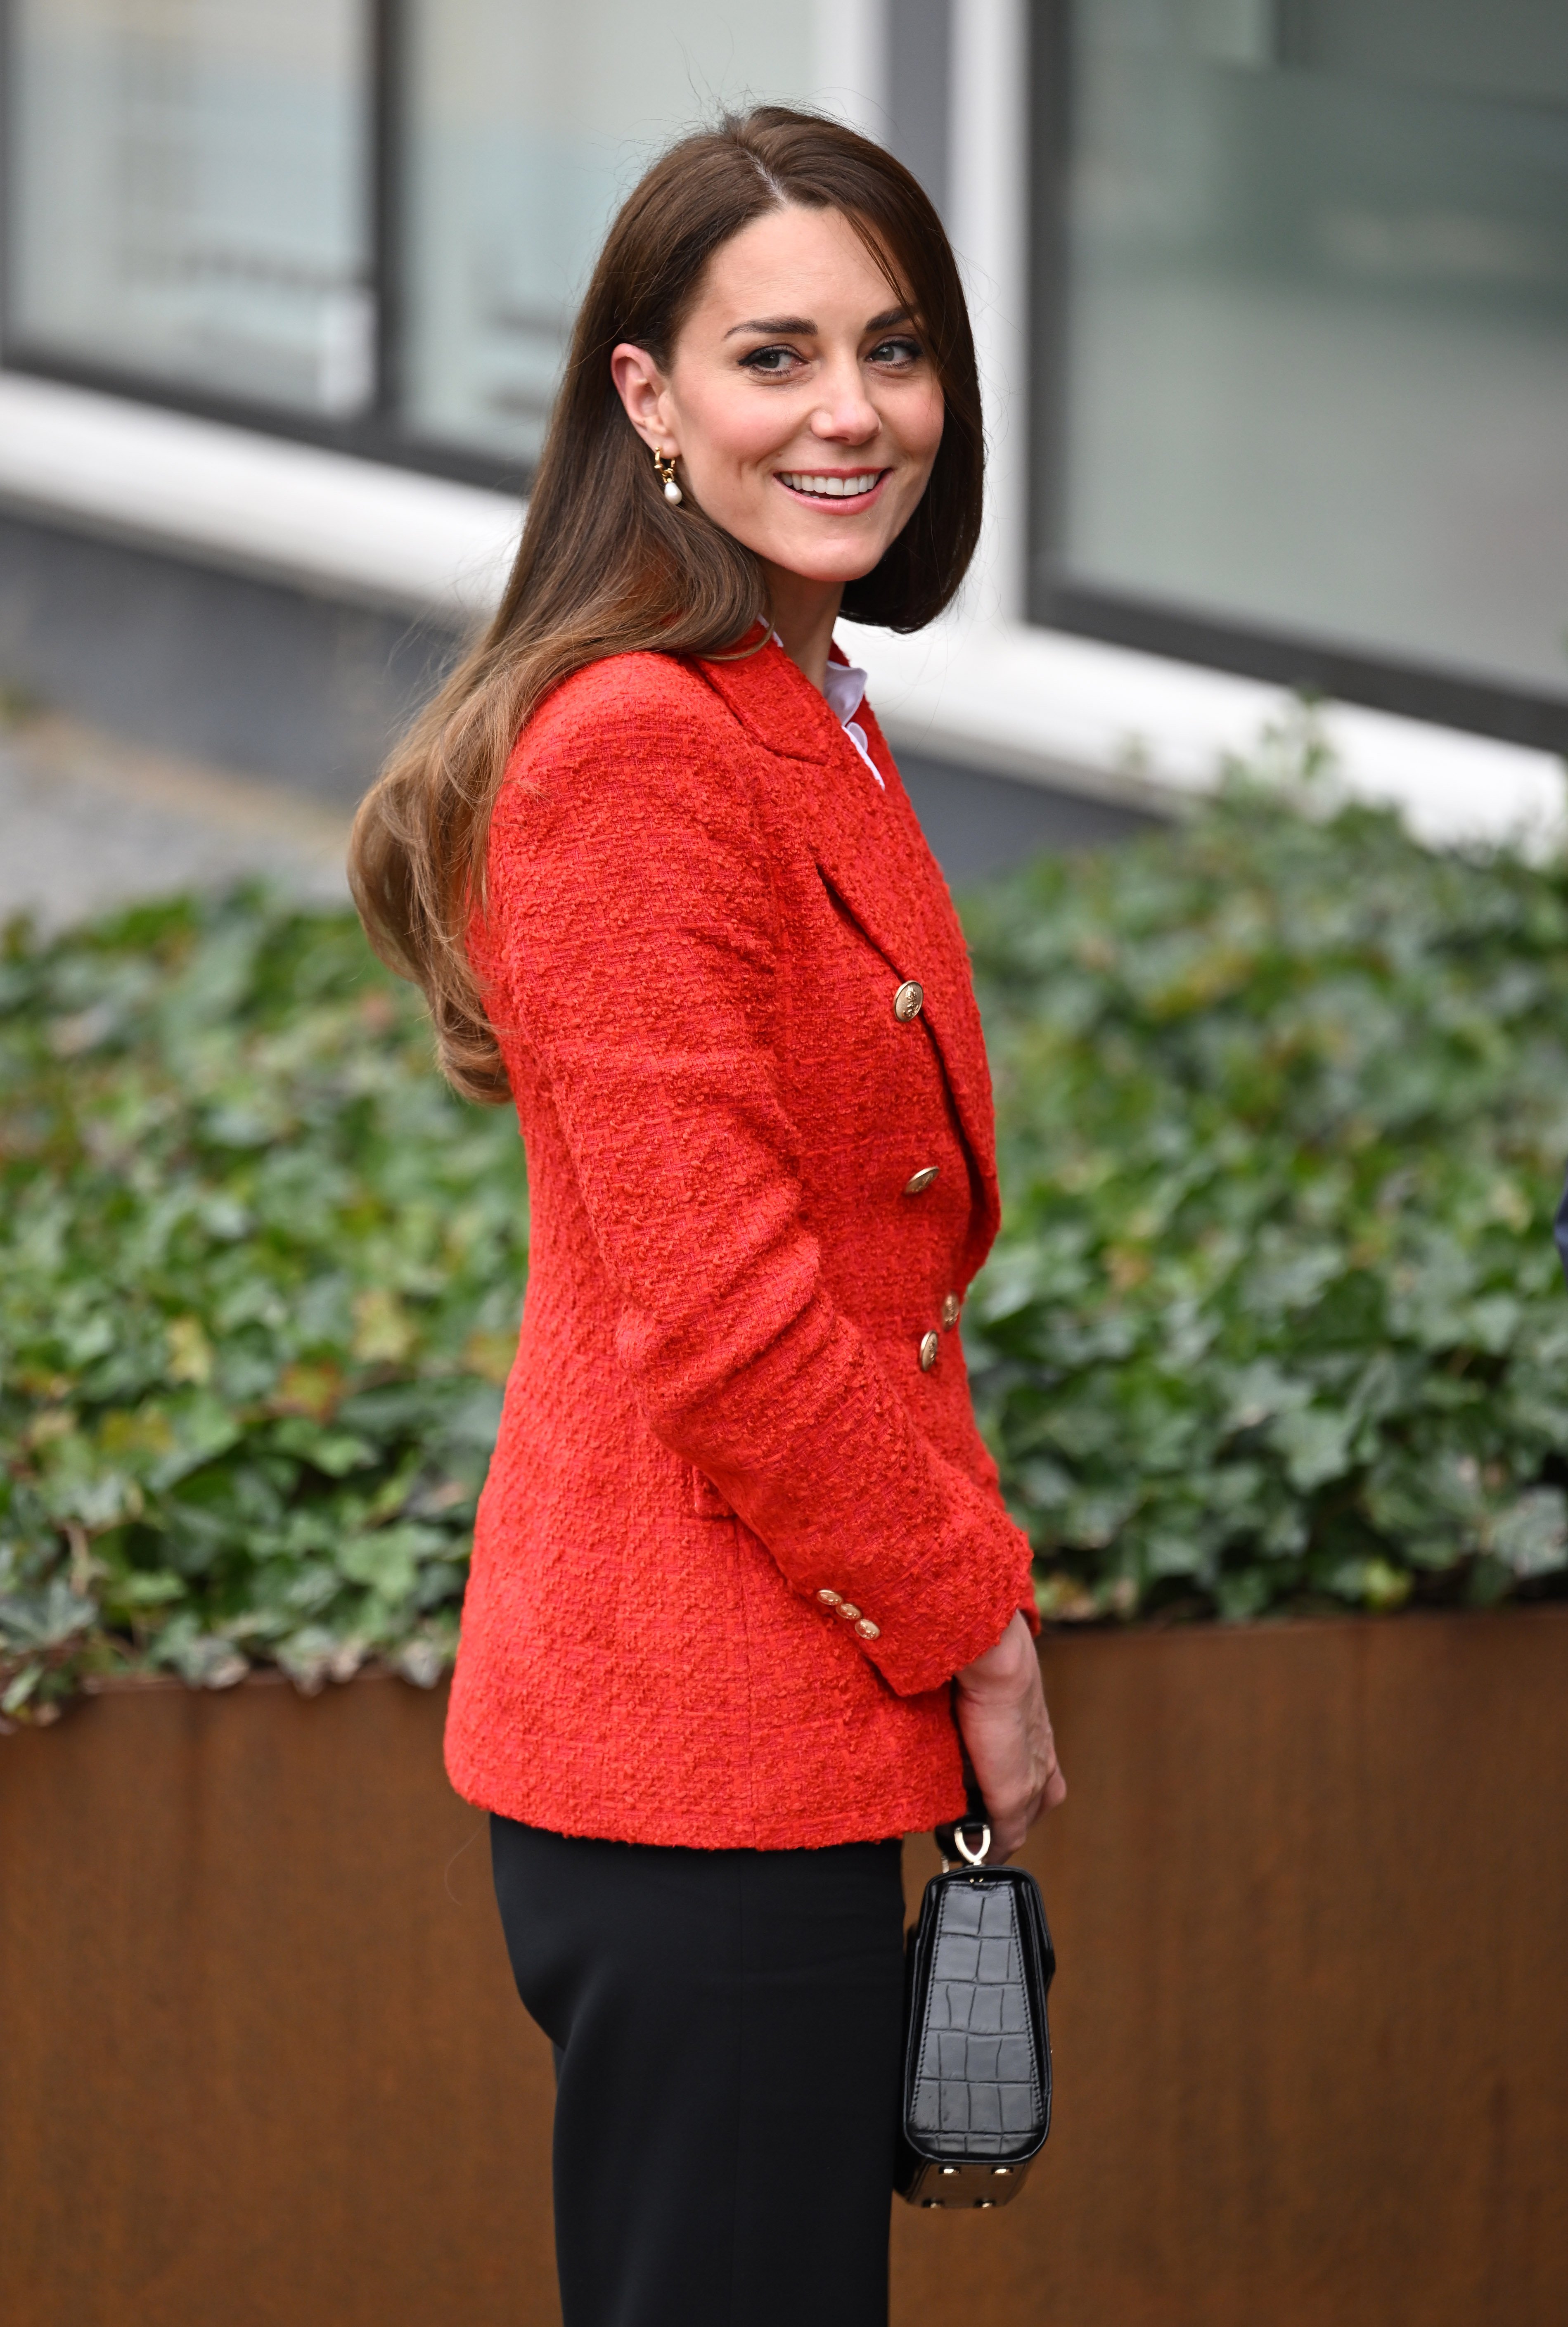 Kate Middleton dons a red Zara blazer during a visit to the Copenhagen Infant Mental Health Project